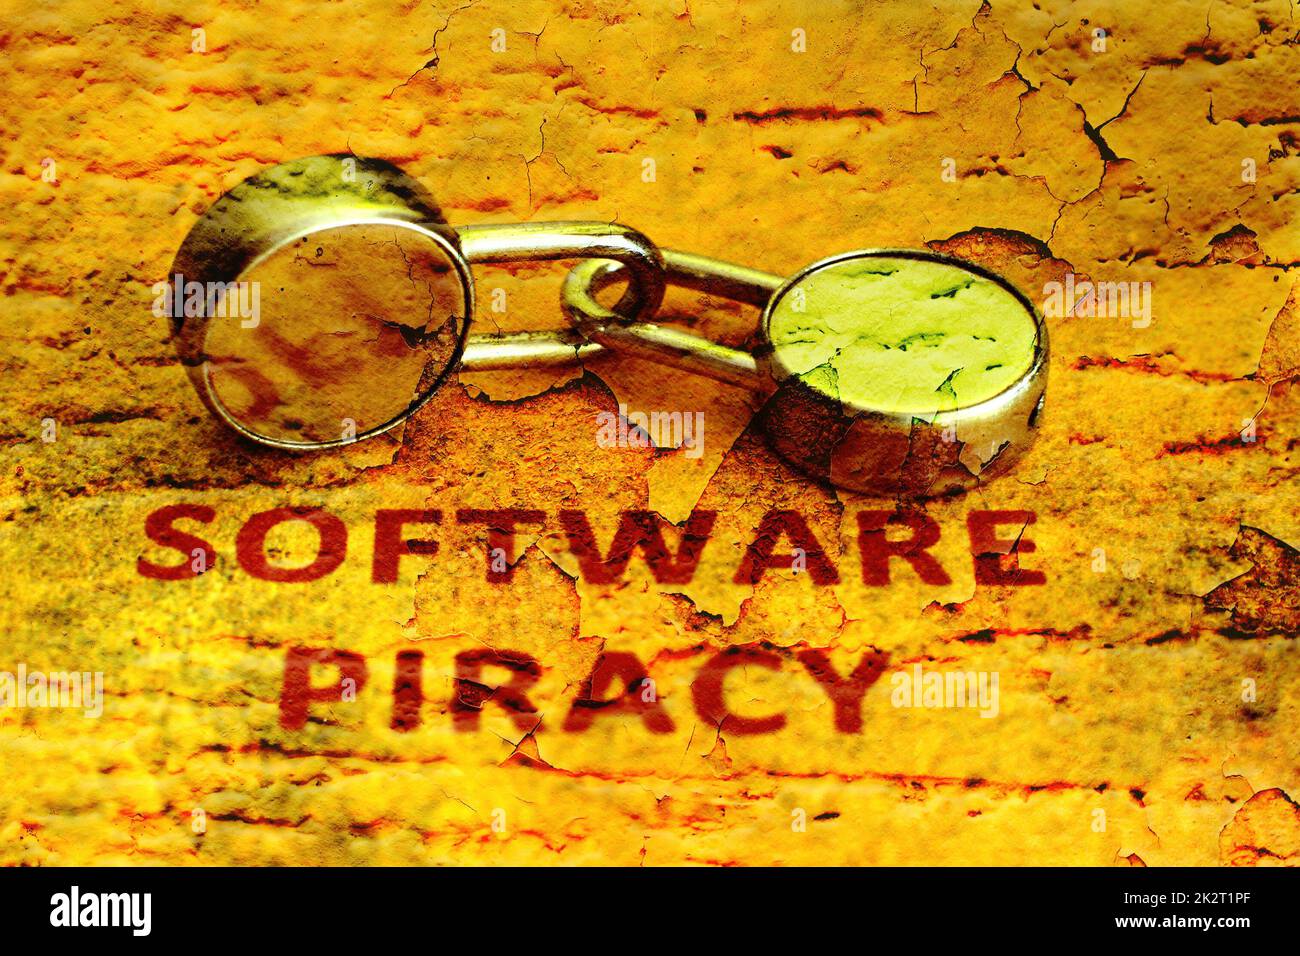 Pirate Matryoshka: The dangers of downloading software from Pirate